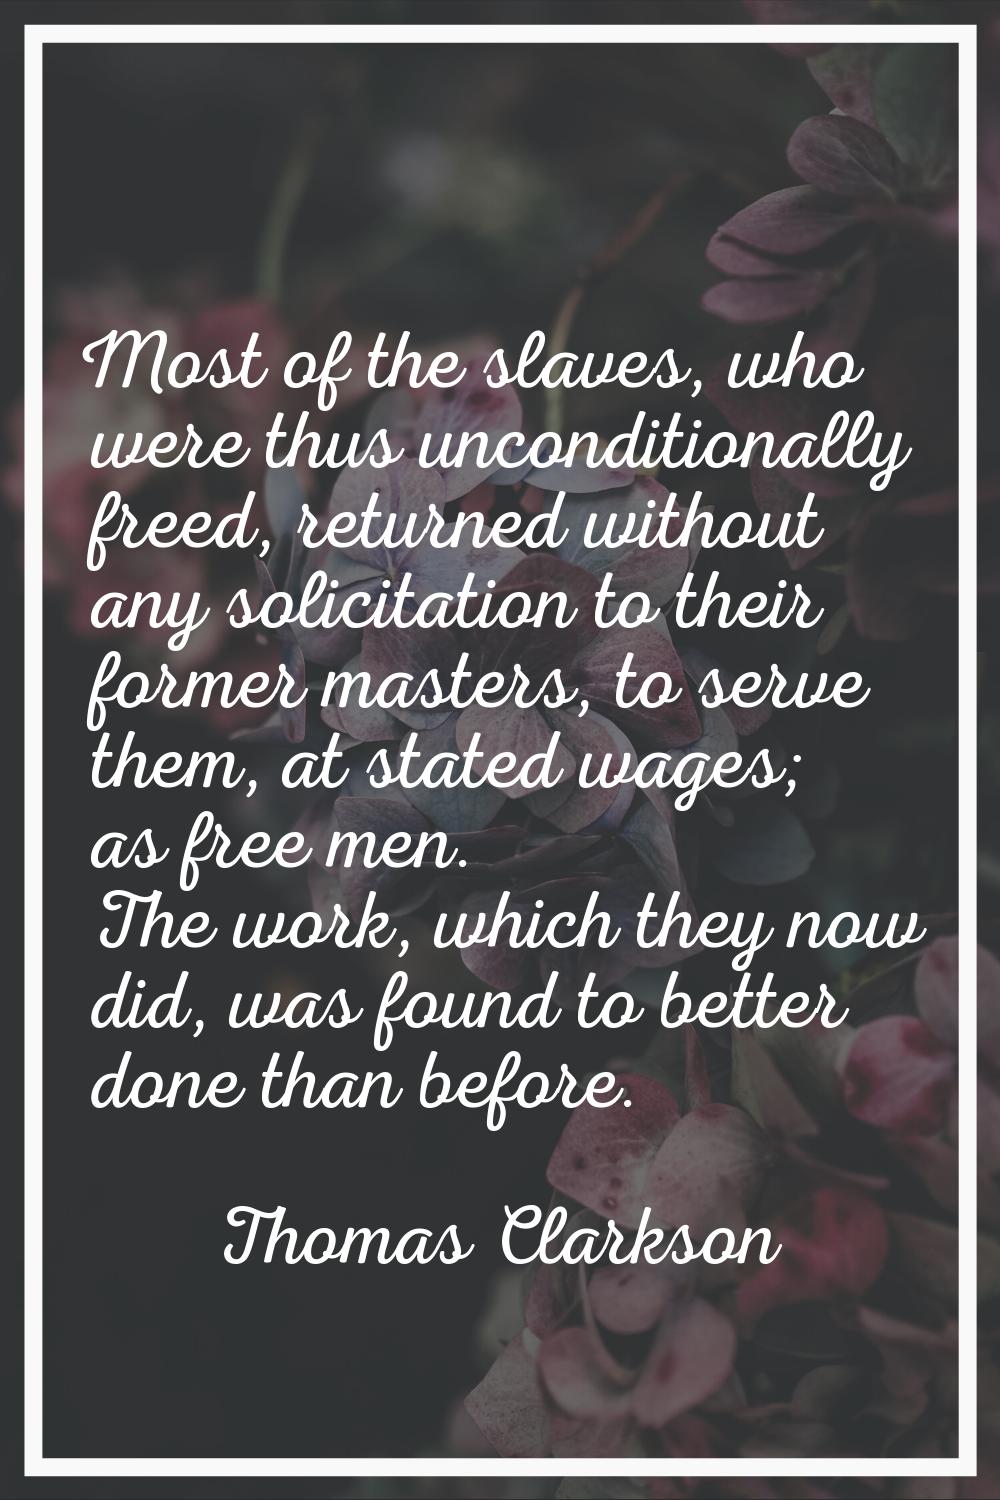 Most of the slaves, who were thus unconditionally freed, returned without any solicitation to their